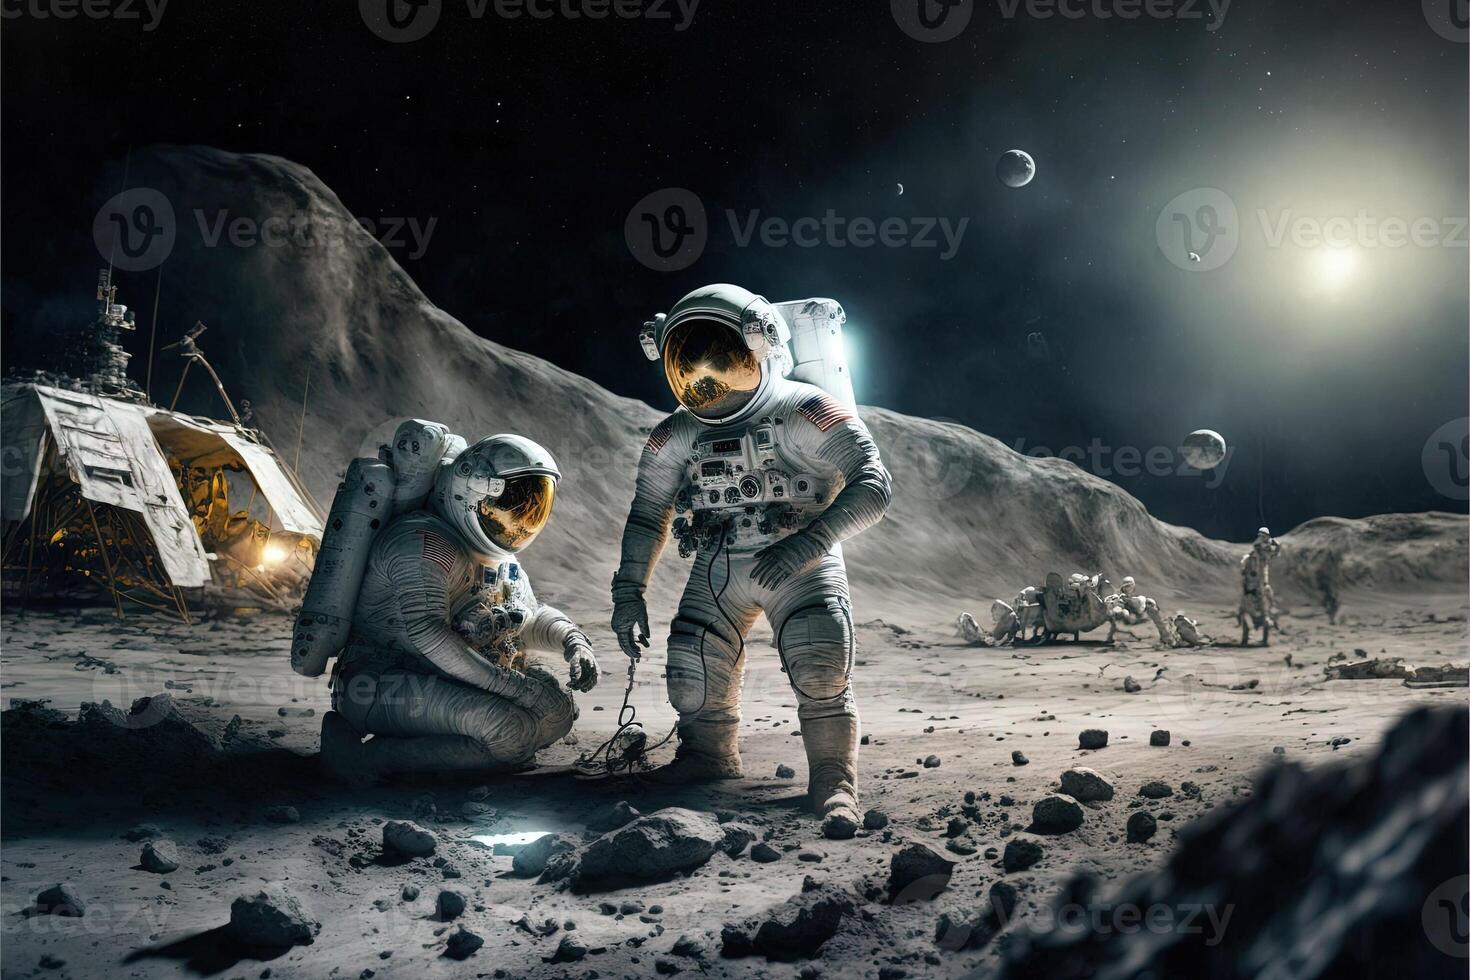 Man is back on the moon, astronaut in spacesuit walking on the moon Illustration photo